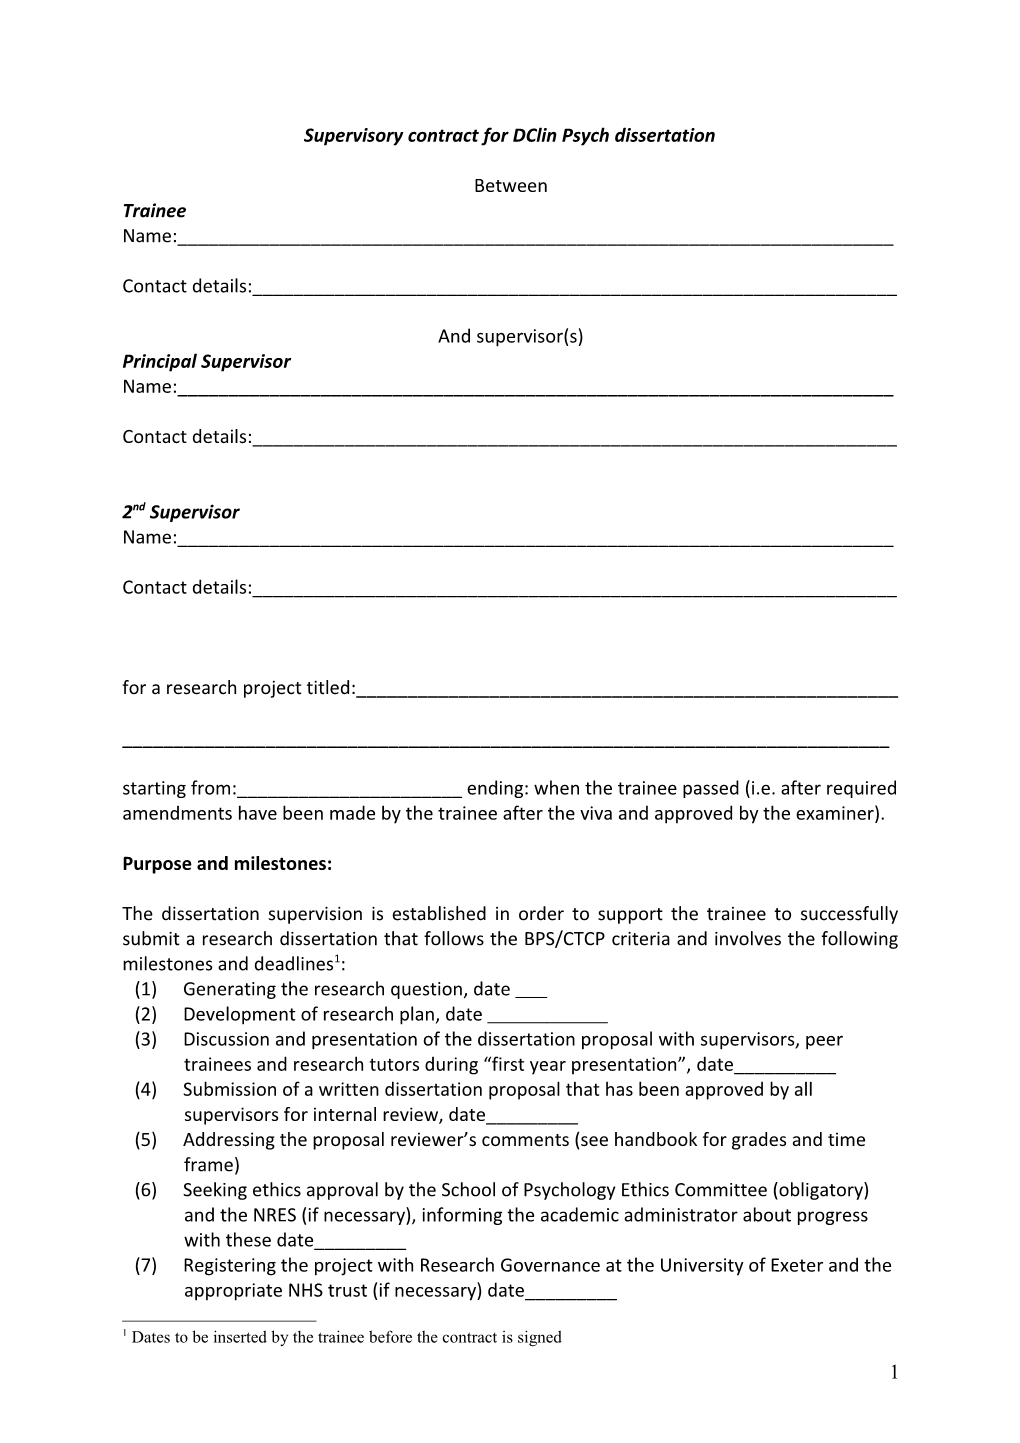 Supervisory Contract for Dclin Psych Dissertation